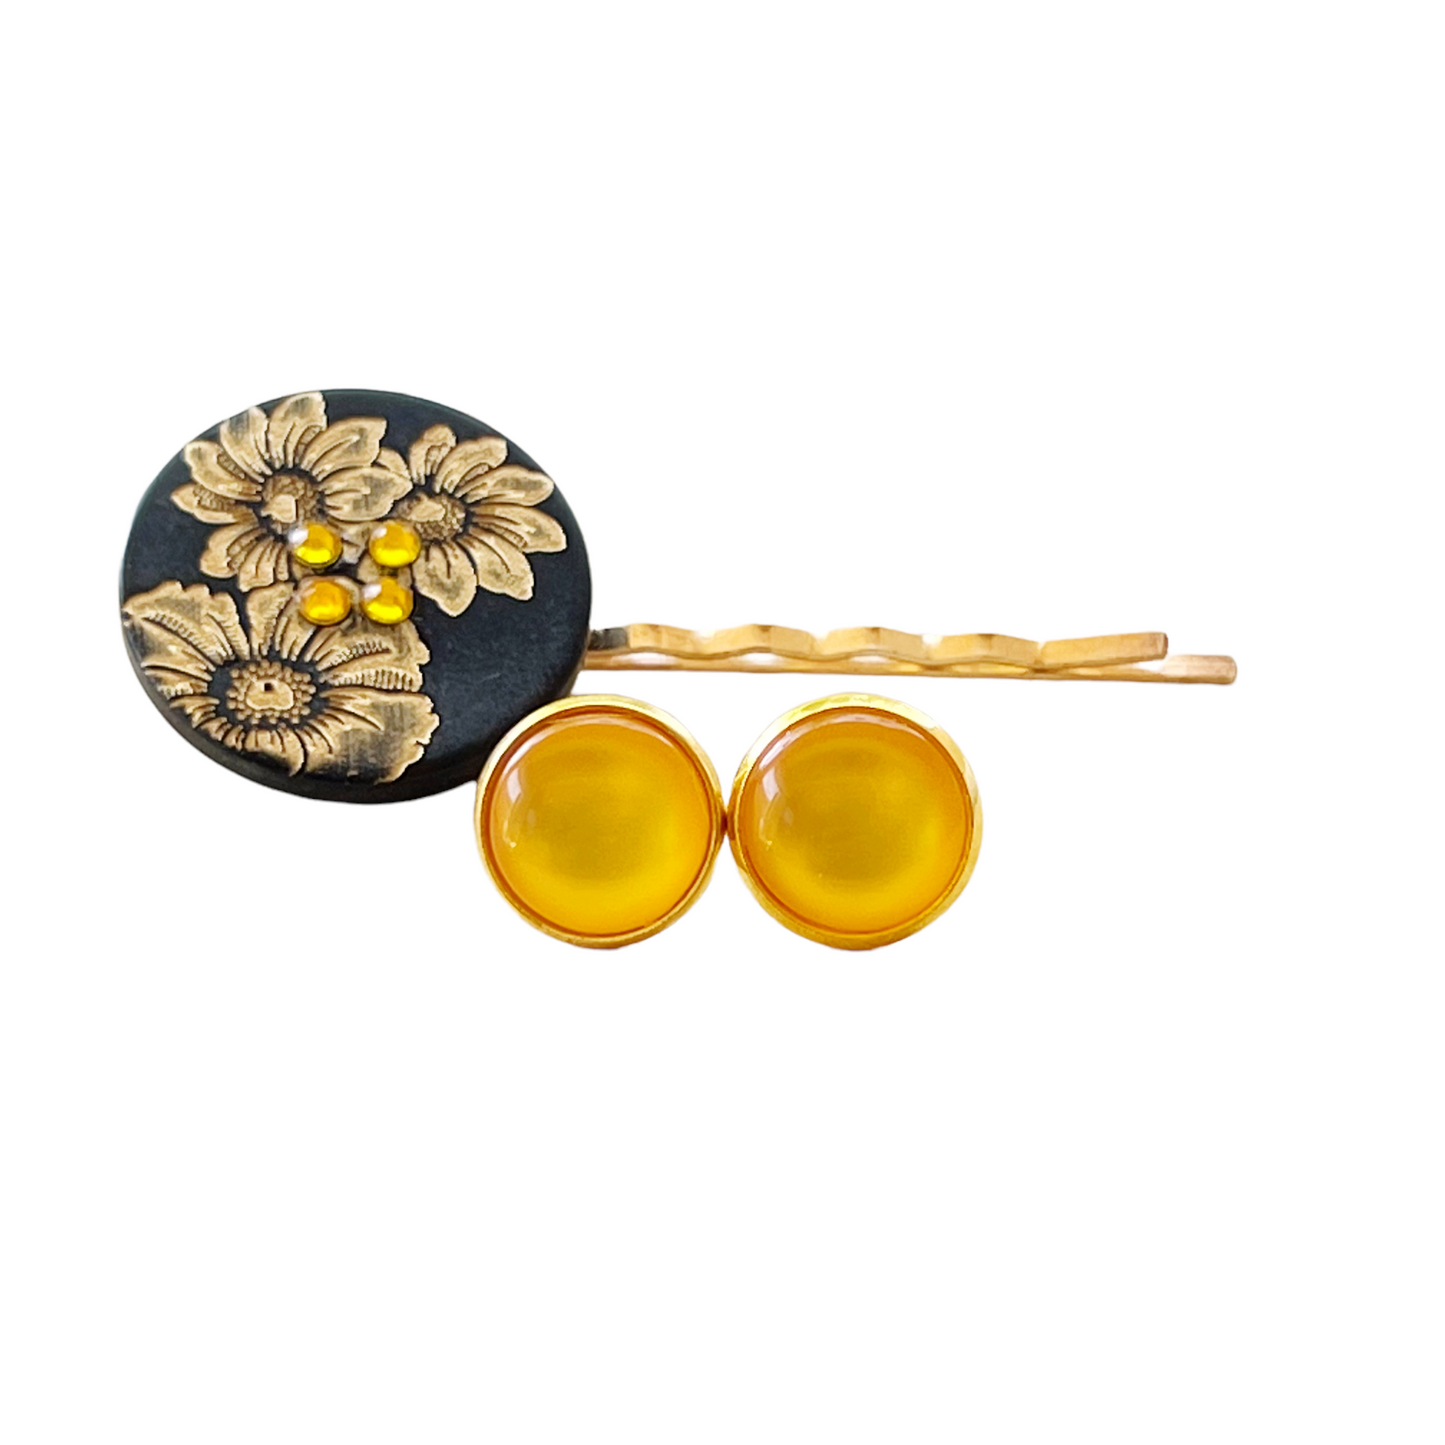 Black & Gold Sunflower Gold Bobby Pin with Matching 12mm Gold Earrings - Stylish Floral Accessories